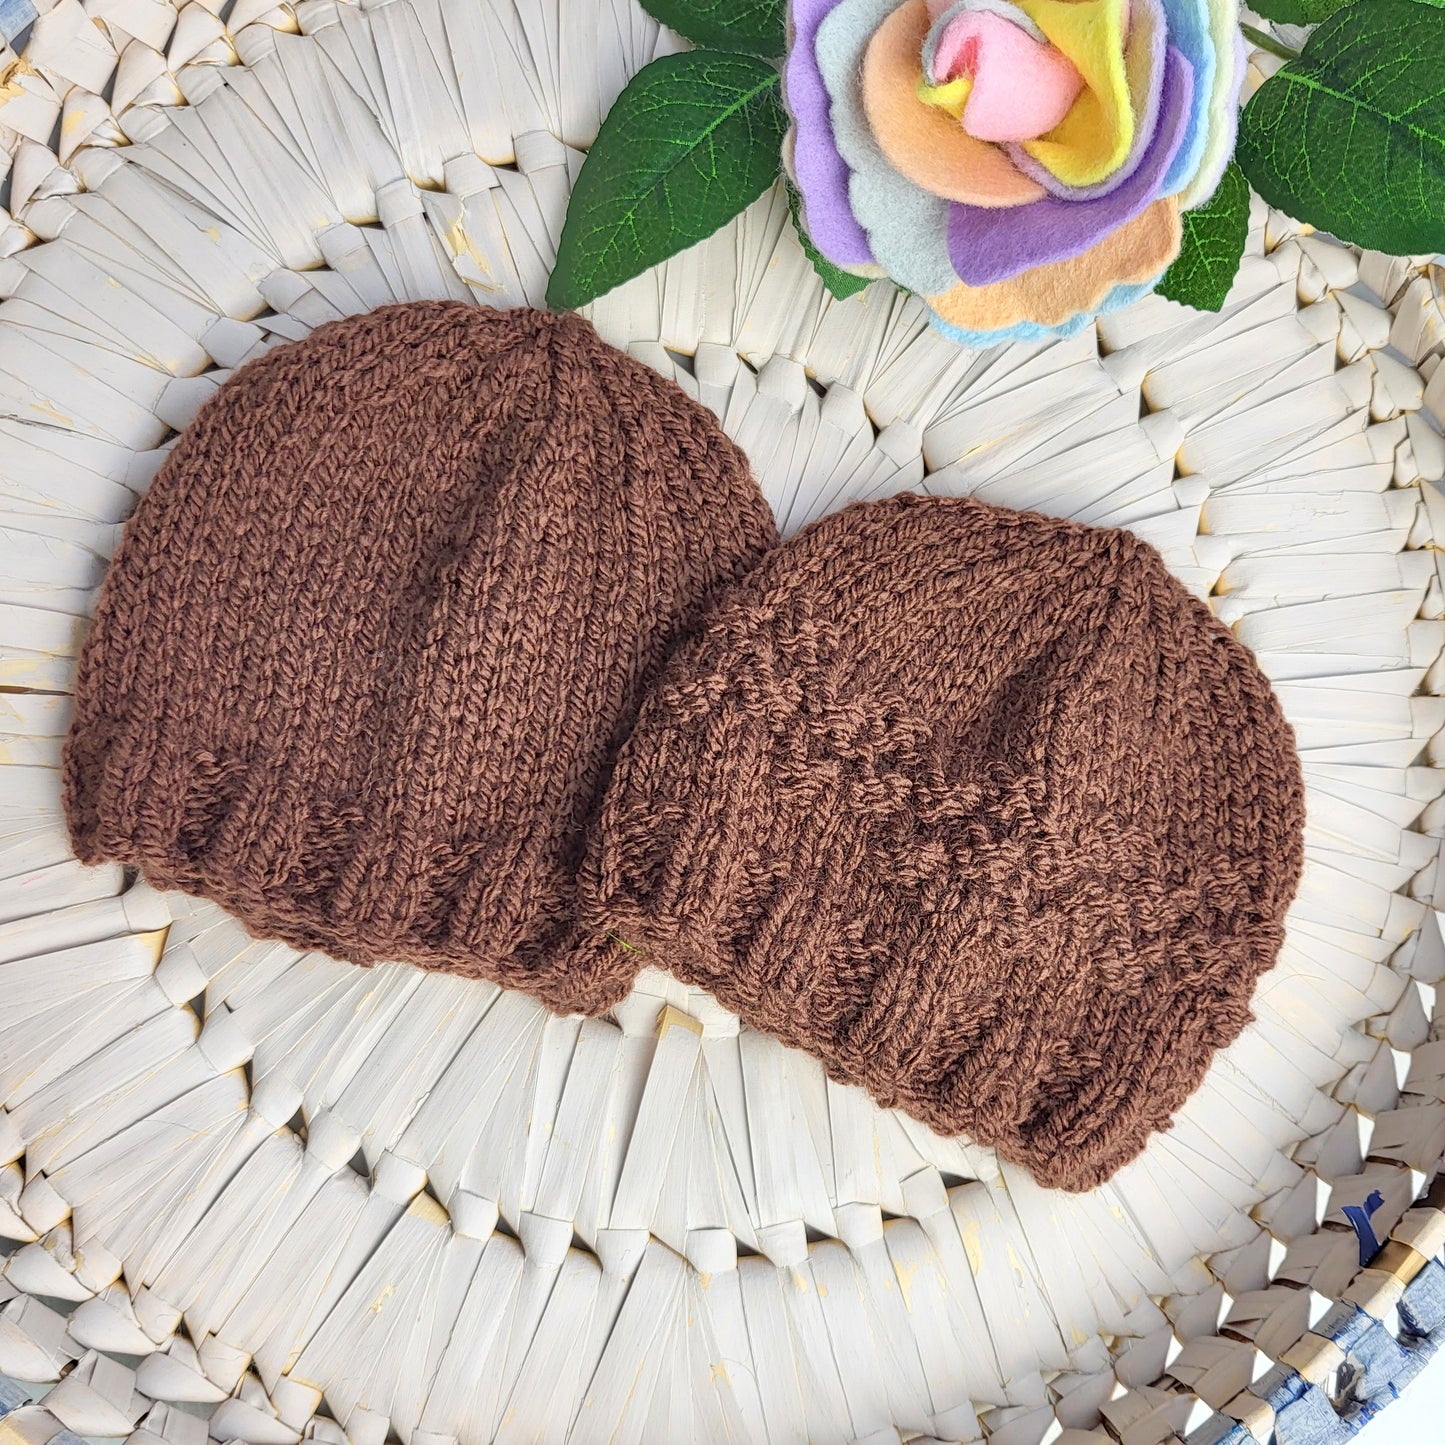 chocolate brown knitted newborn baby hospital coming home hat photo prop 